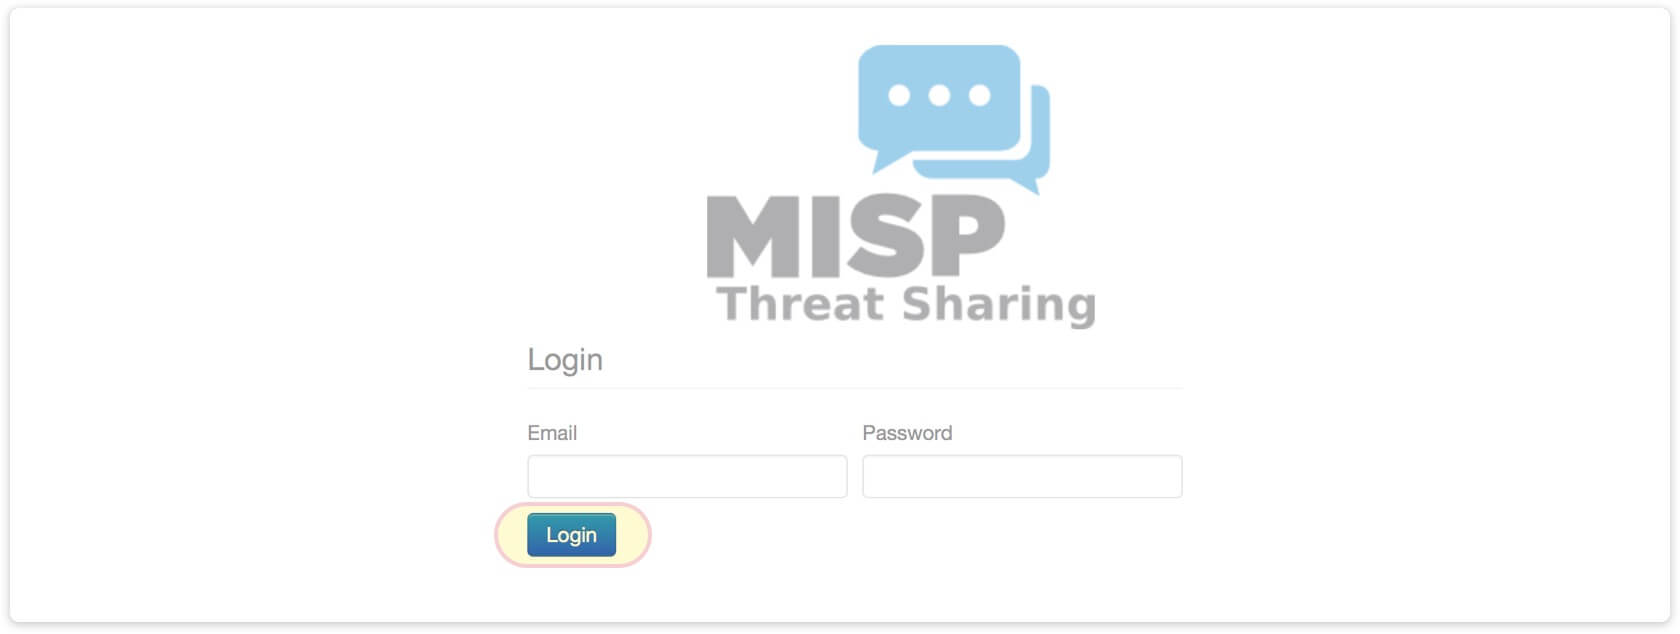 Log in to your MISP instance